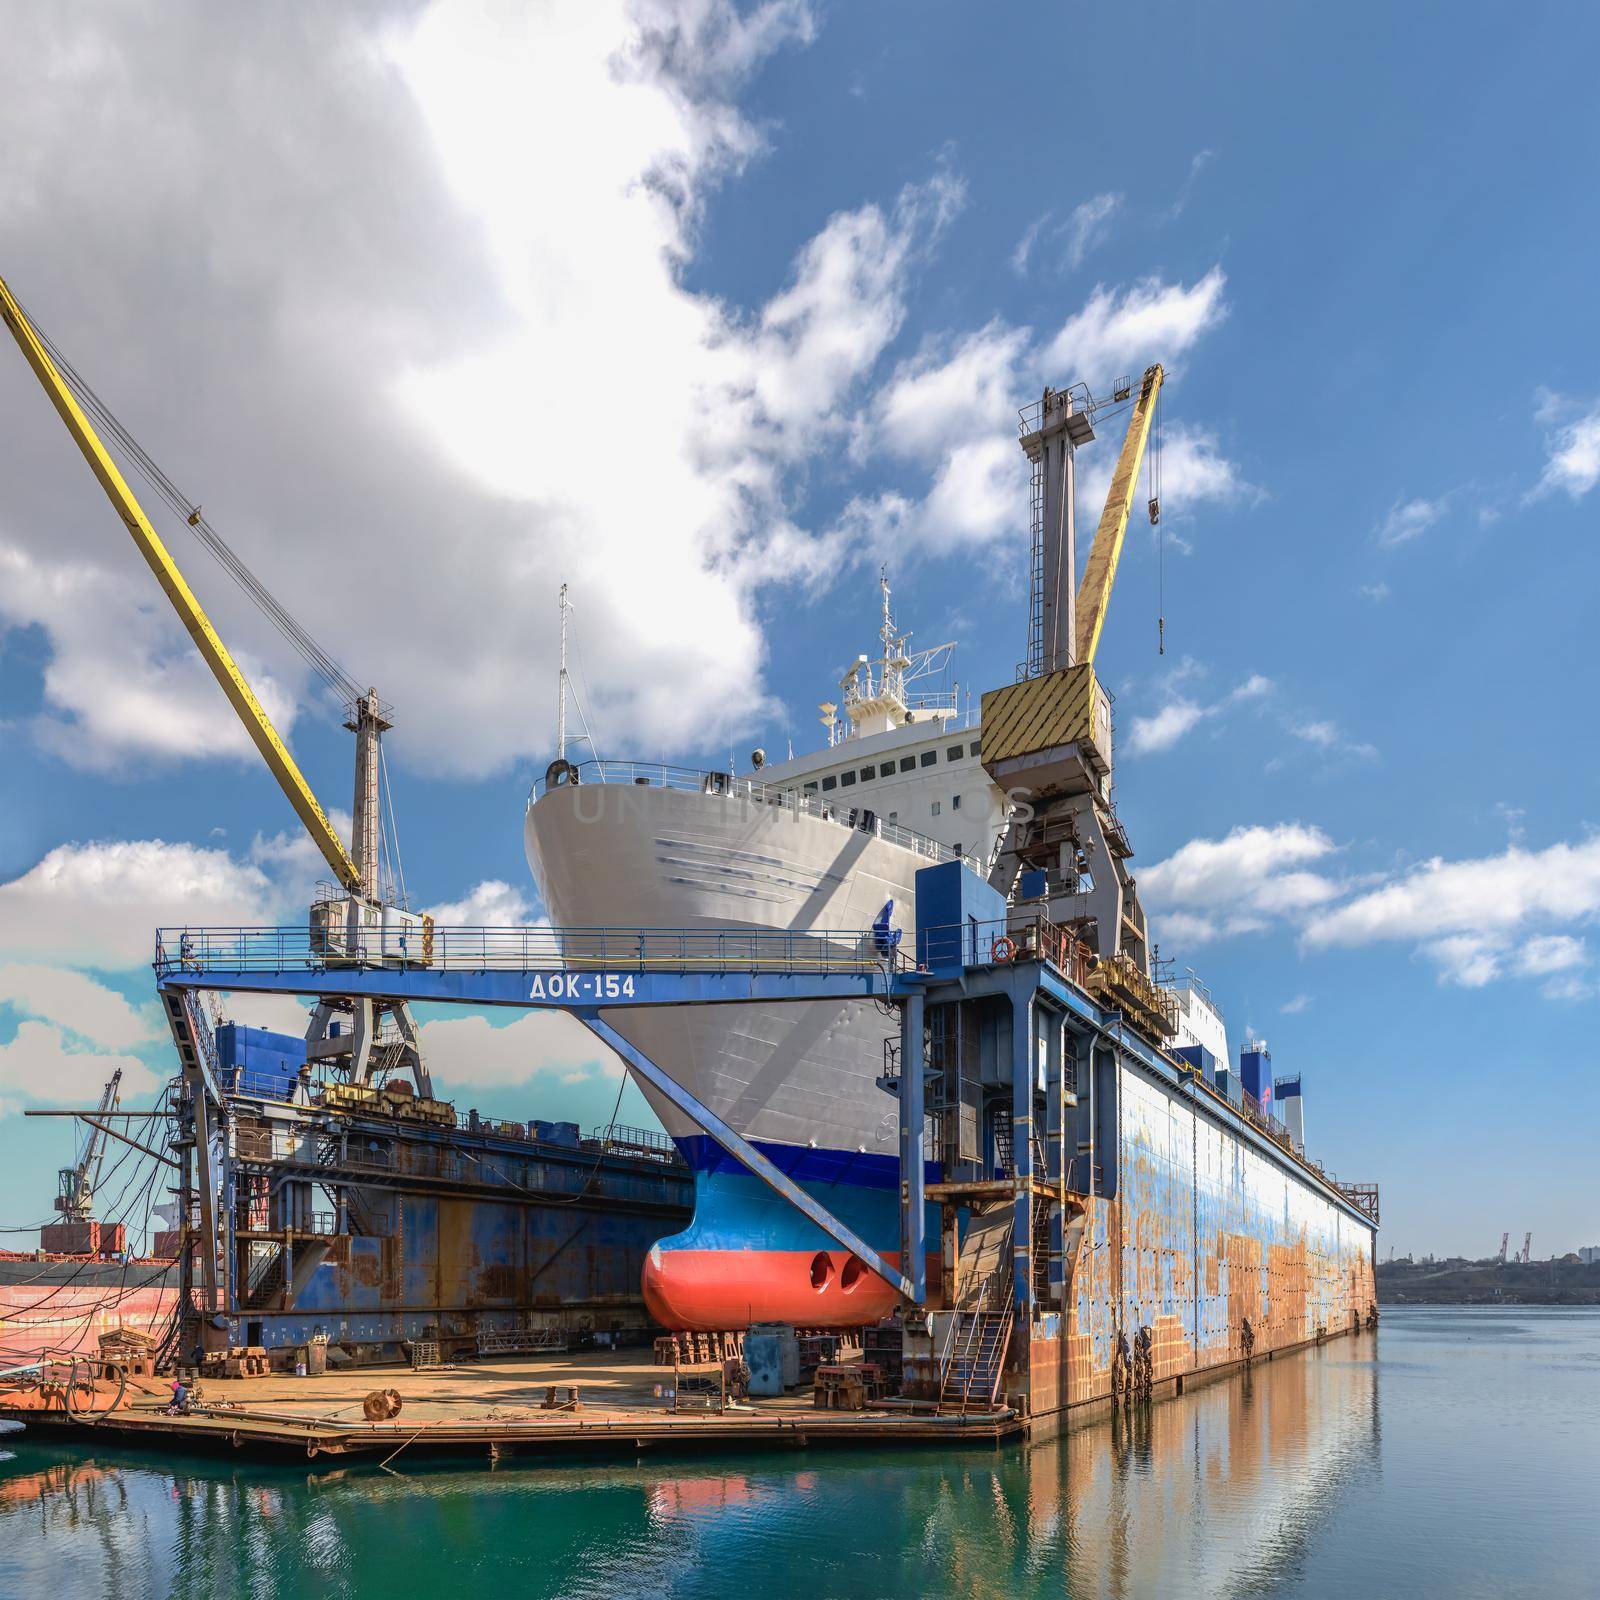 Large ship in dry dock of shipyard by Multipedia